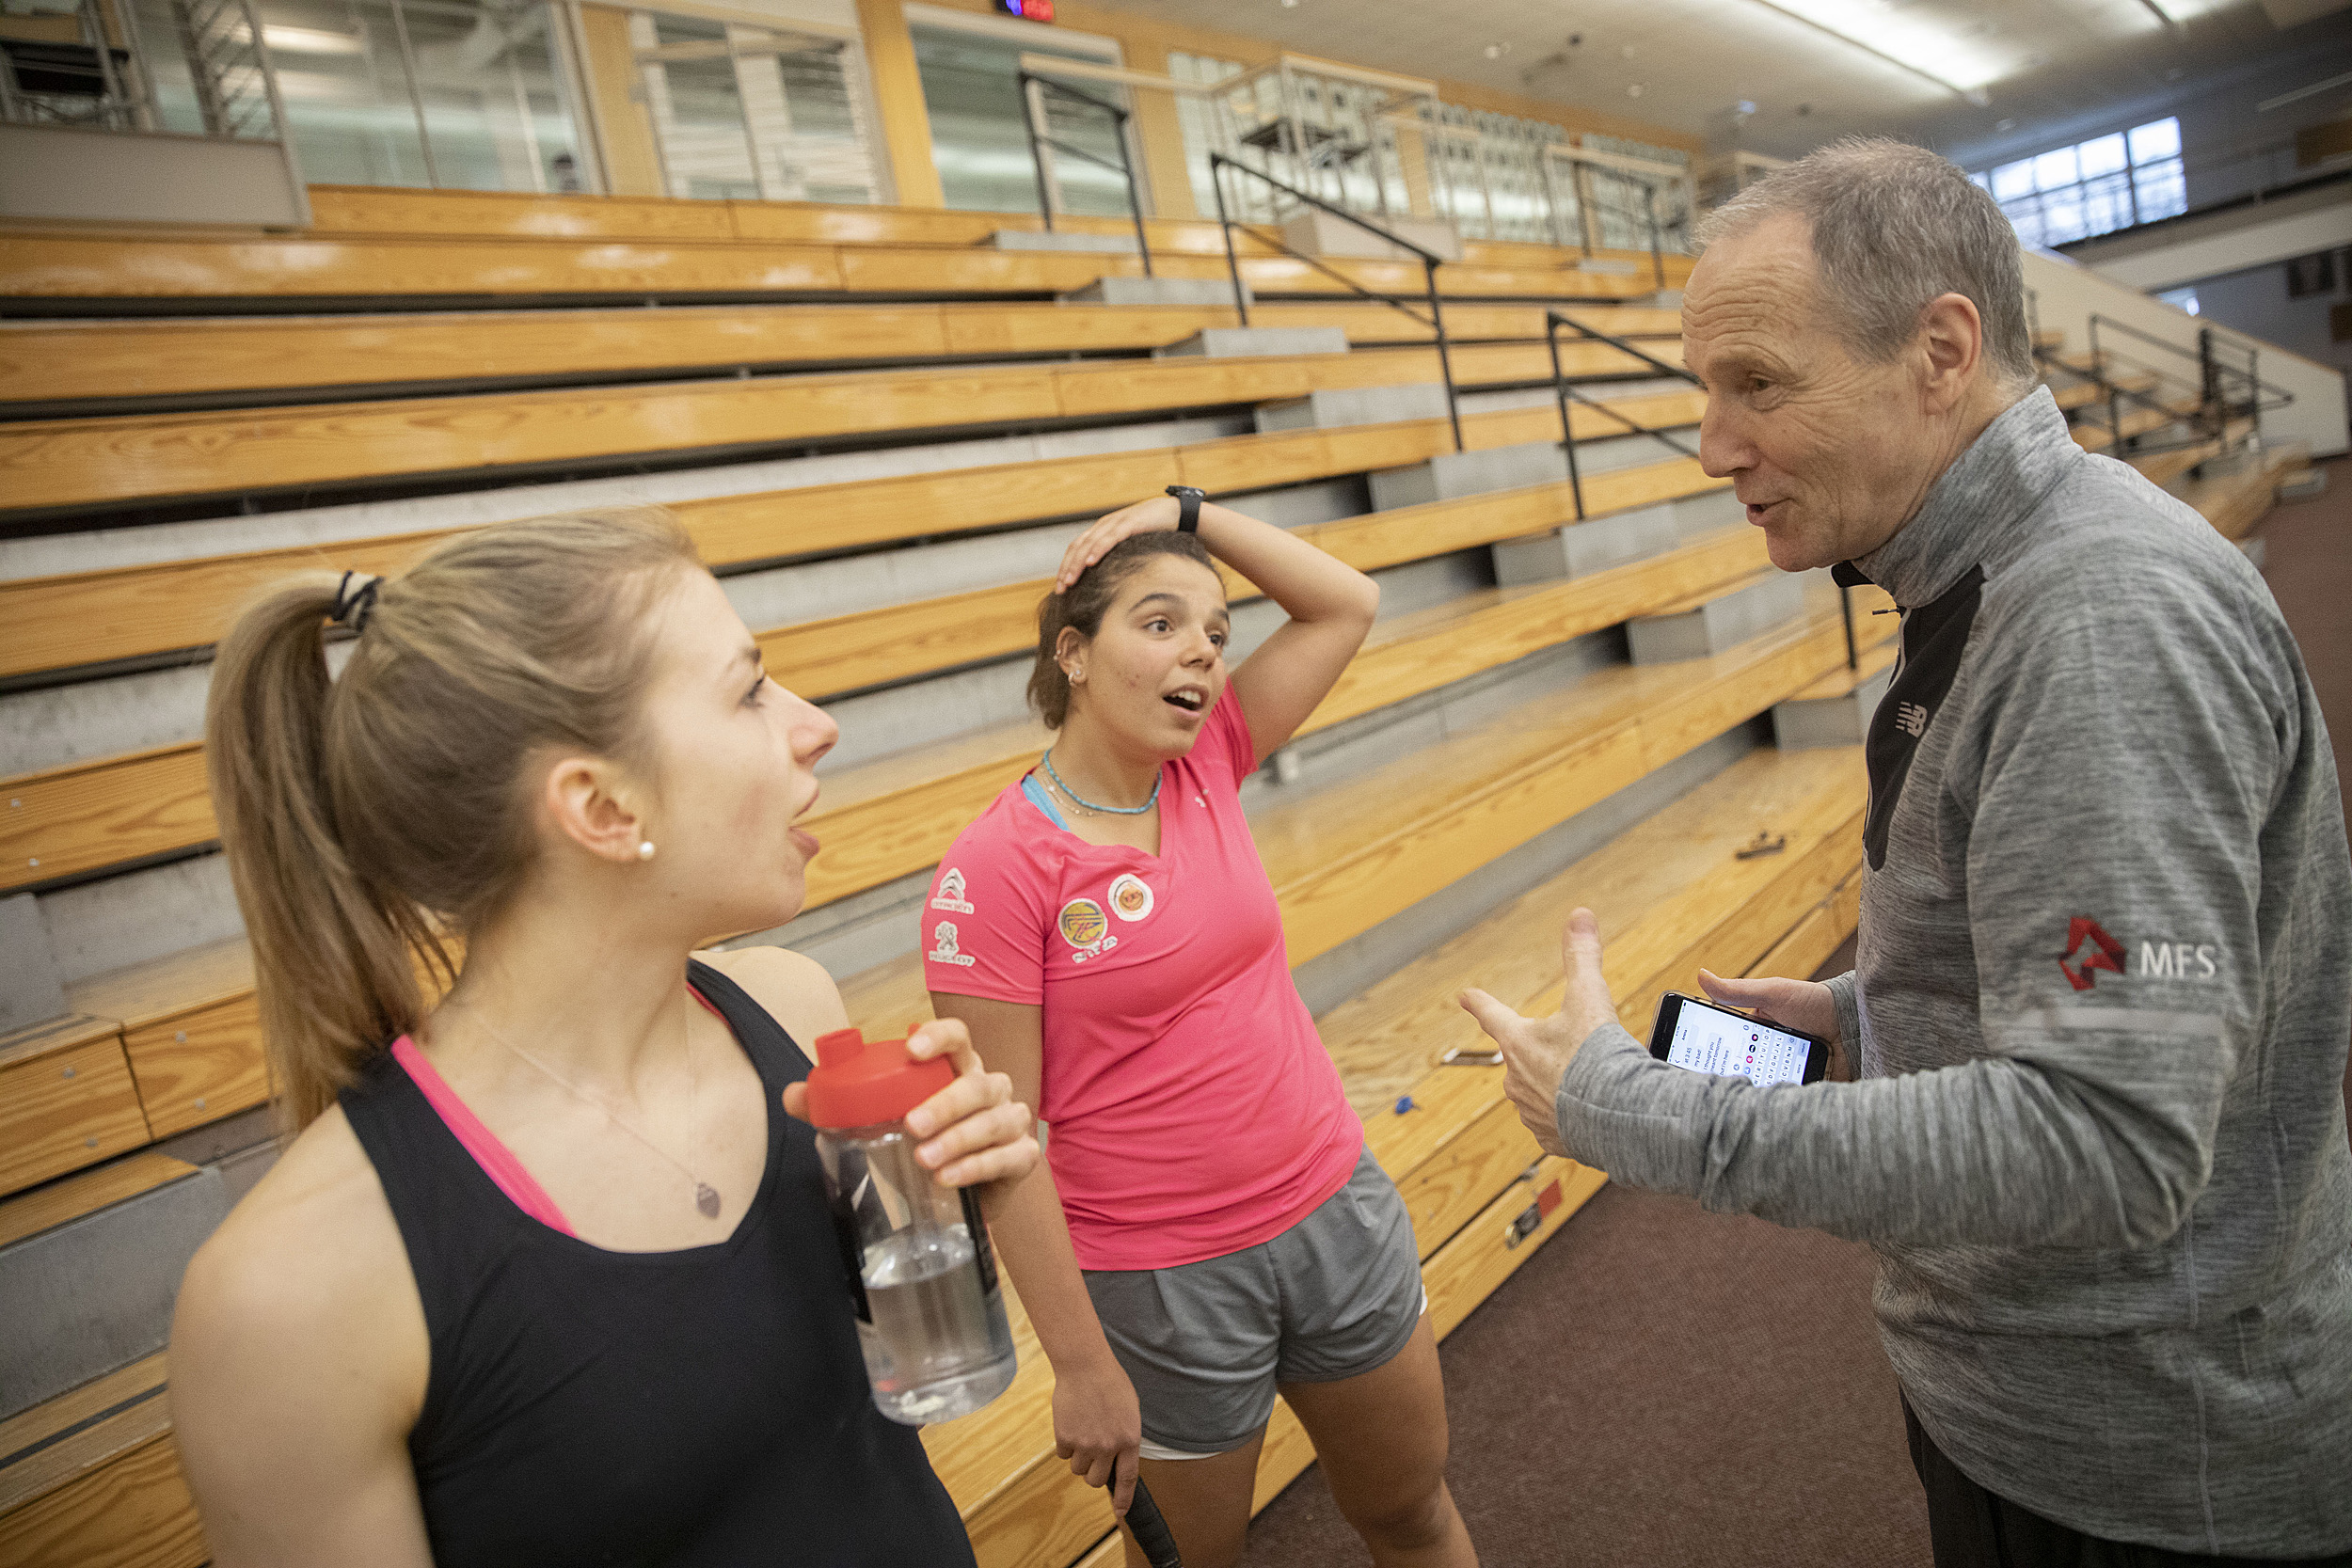 Amelia Henley and Amina Yousrytalk to coach Mike Way at the Murr Center.